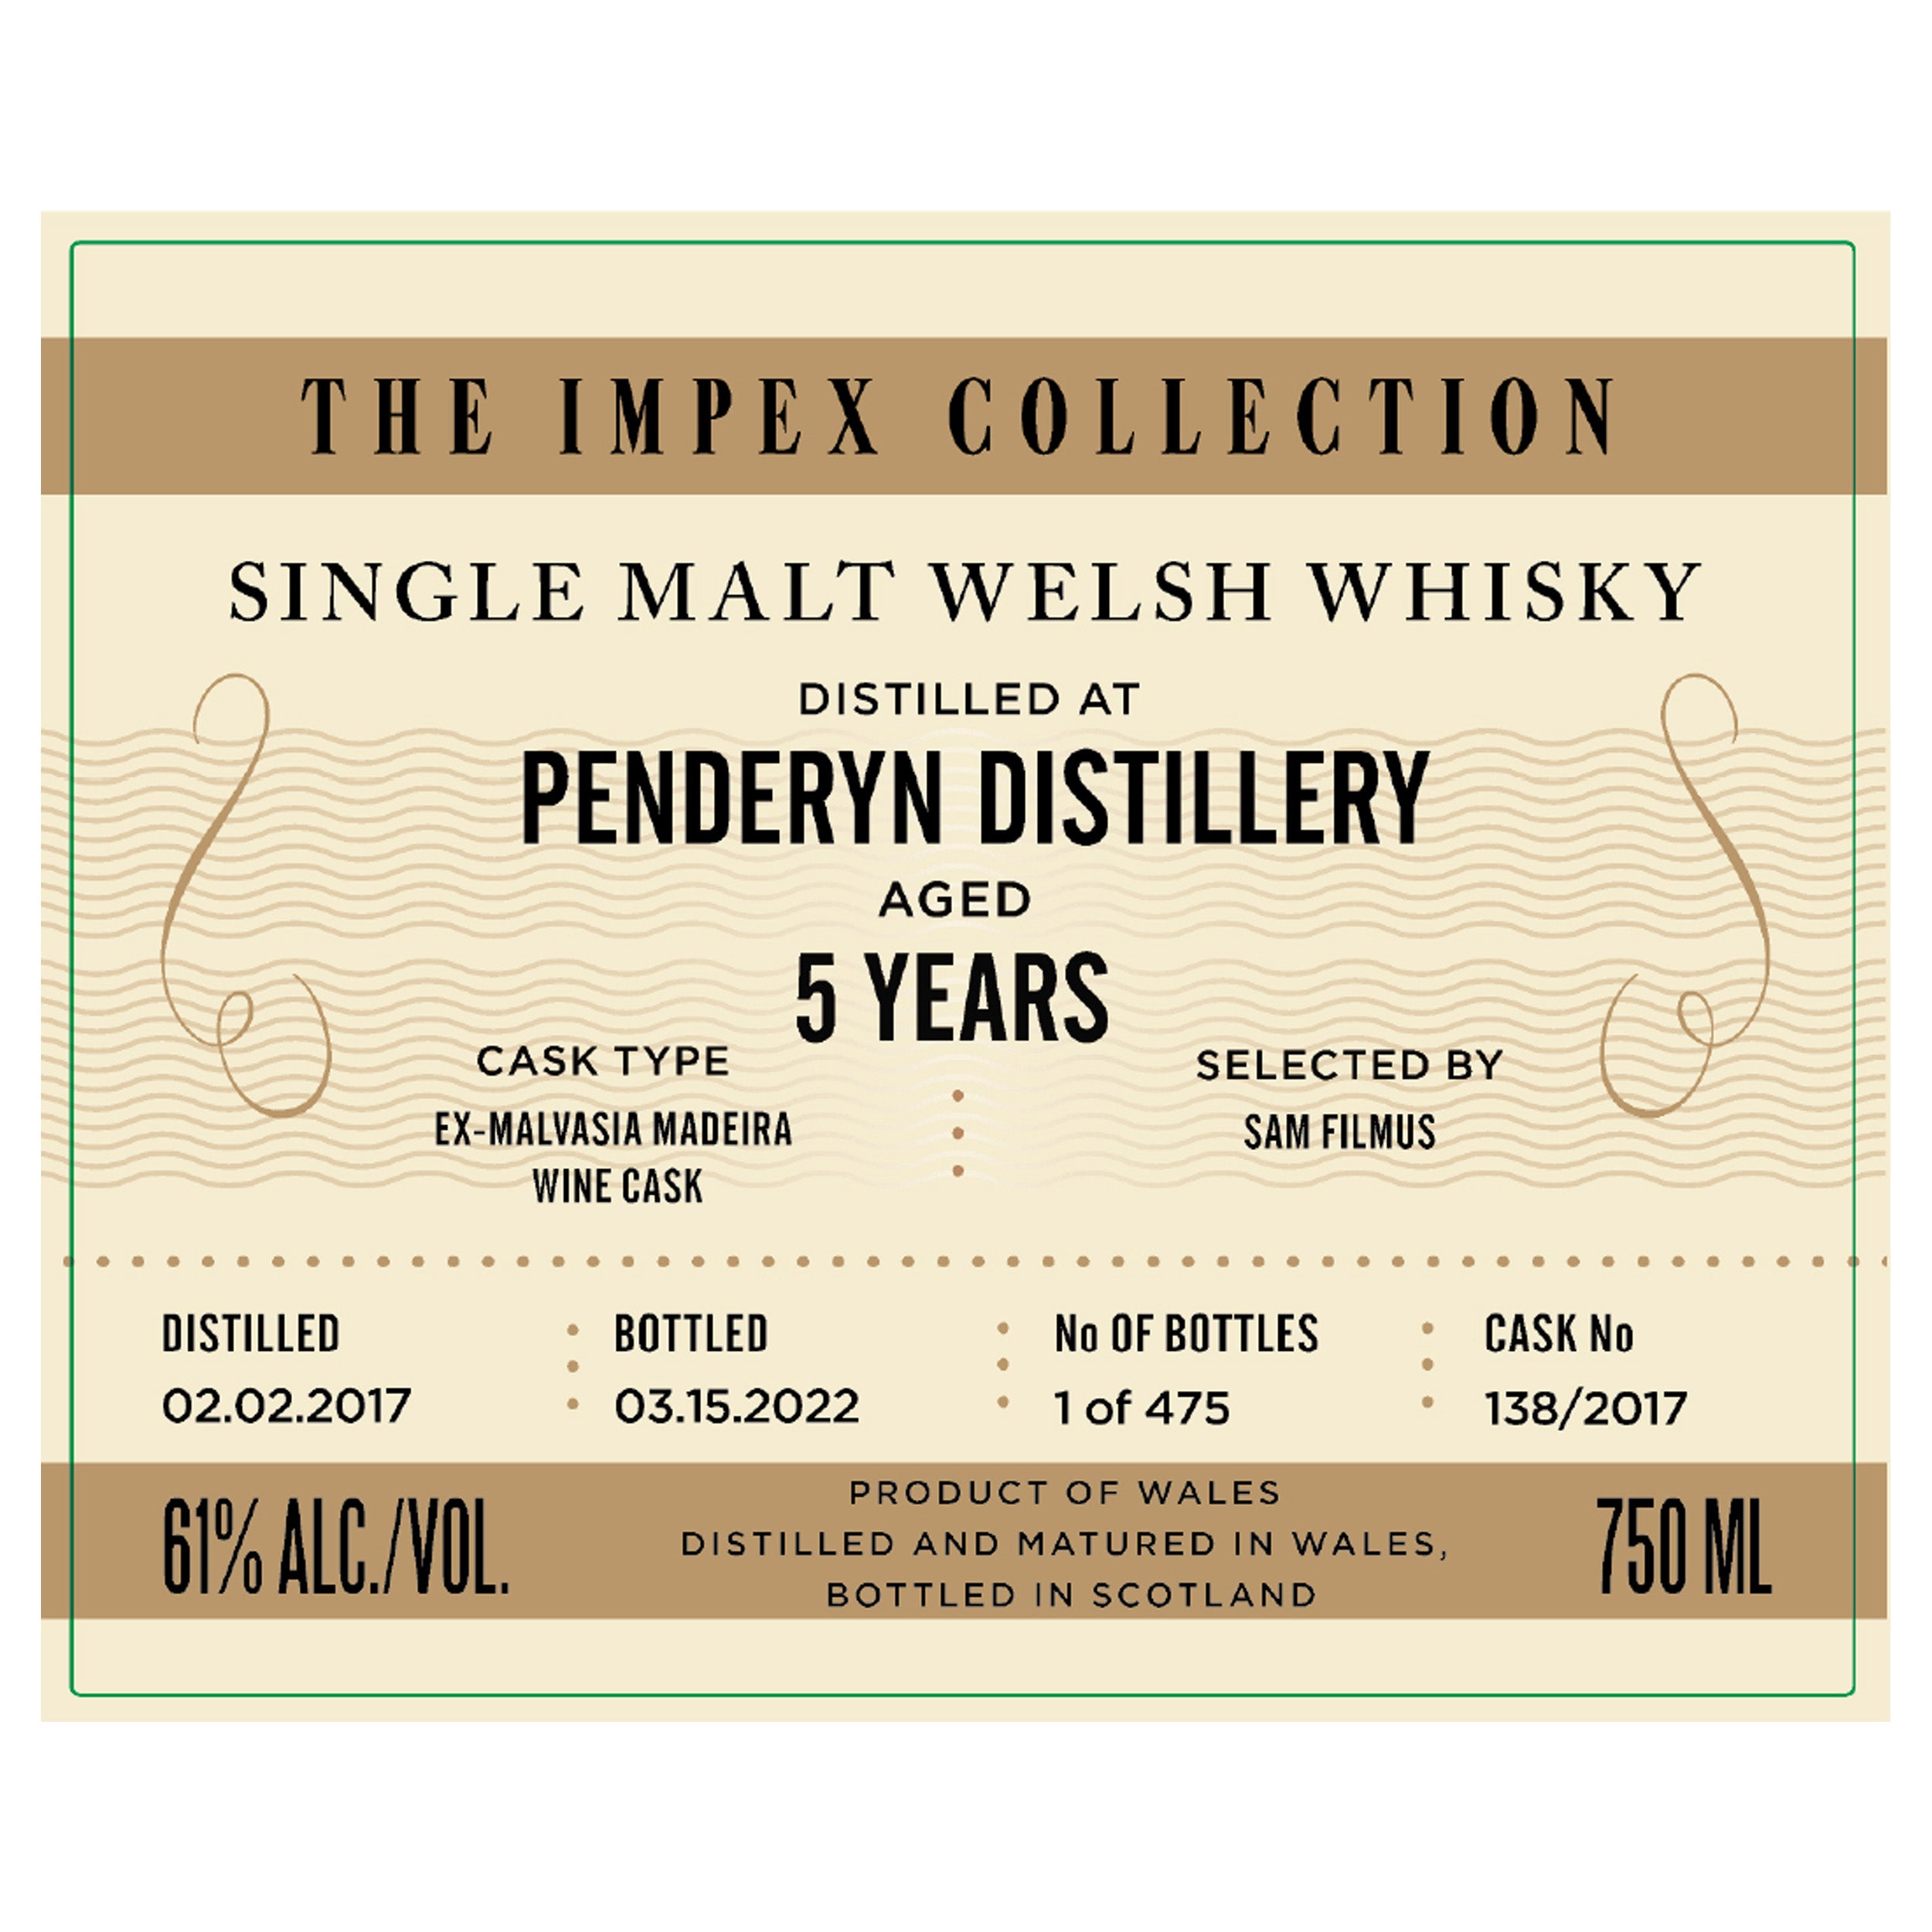 The Impex Collection 5 Year Old Ex-Malvasia Madeira Wine Cask No 138 Penderyn Distillery Single Malt Welsh Whiskey